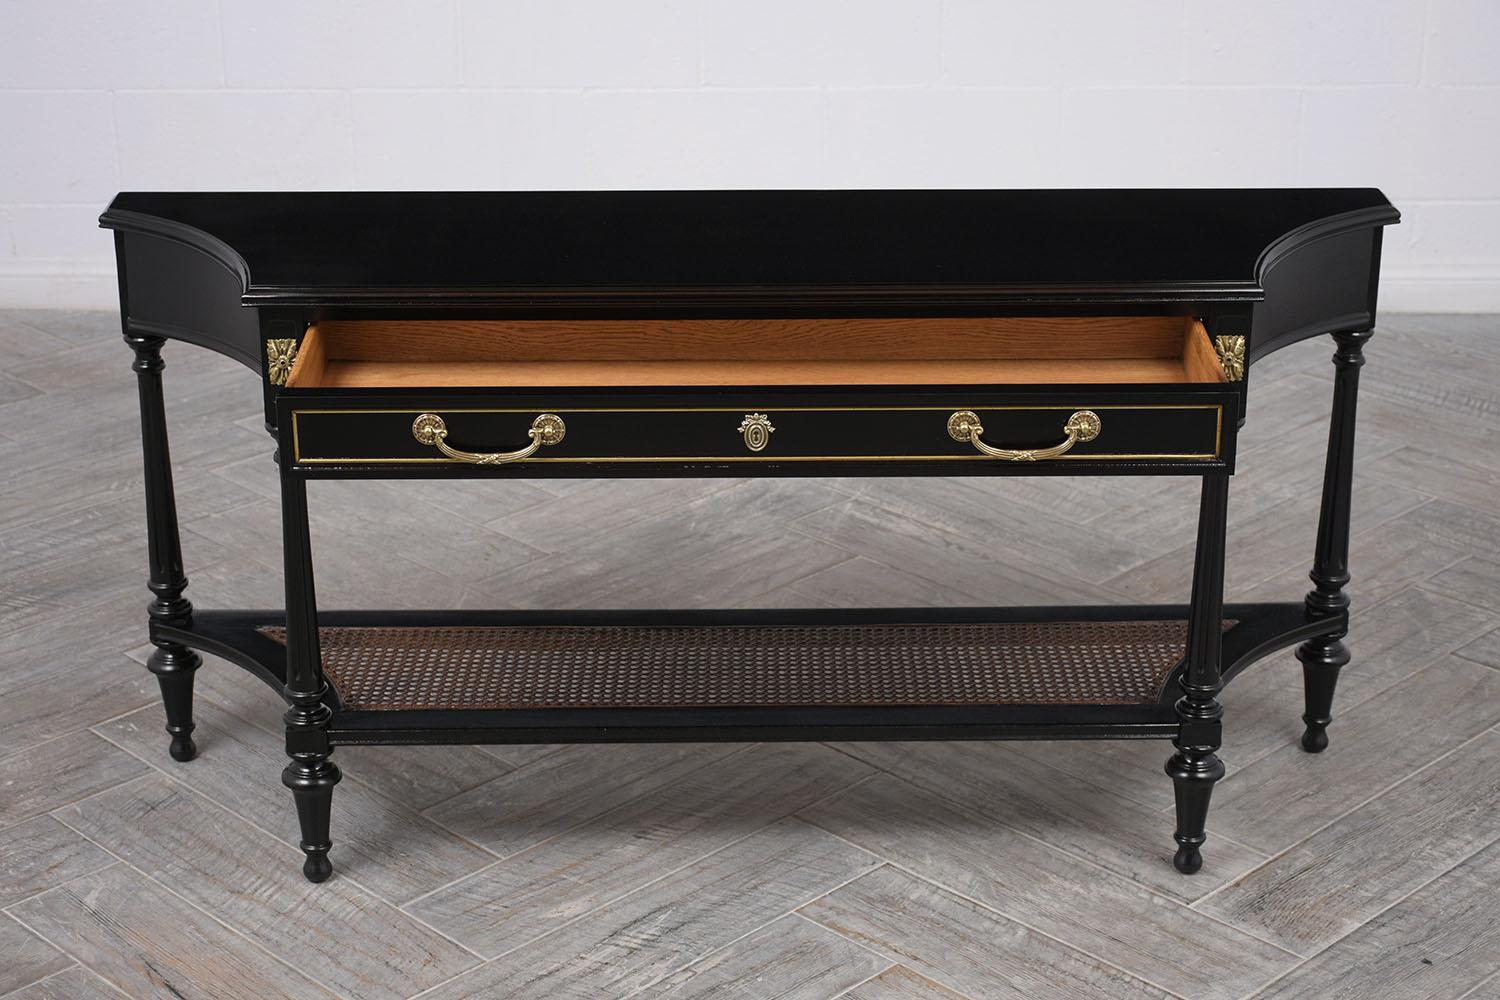 Beautiful 1950s console table in Hollywood Regency-style. Solid unique mahogany wood top with beveled trim. Single long front drawer with 2 brass handles and center keyhole and side brass floral decor. Followed by 4 lovely carved legs, finished with